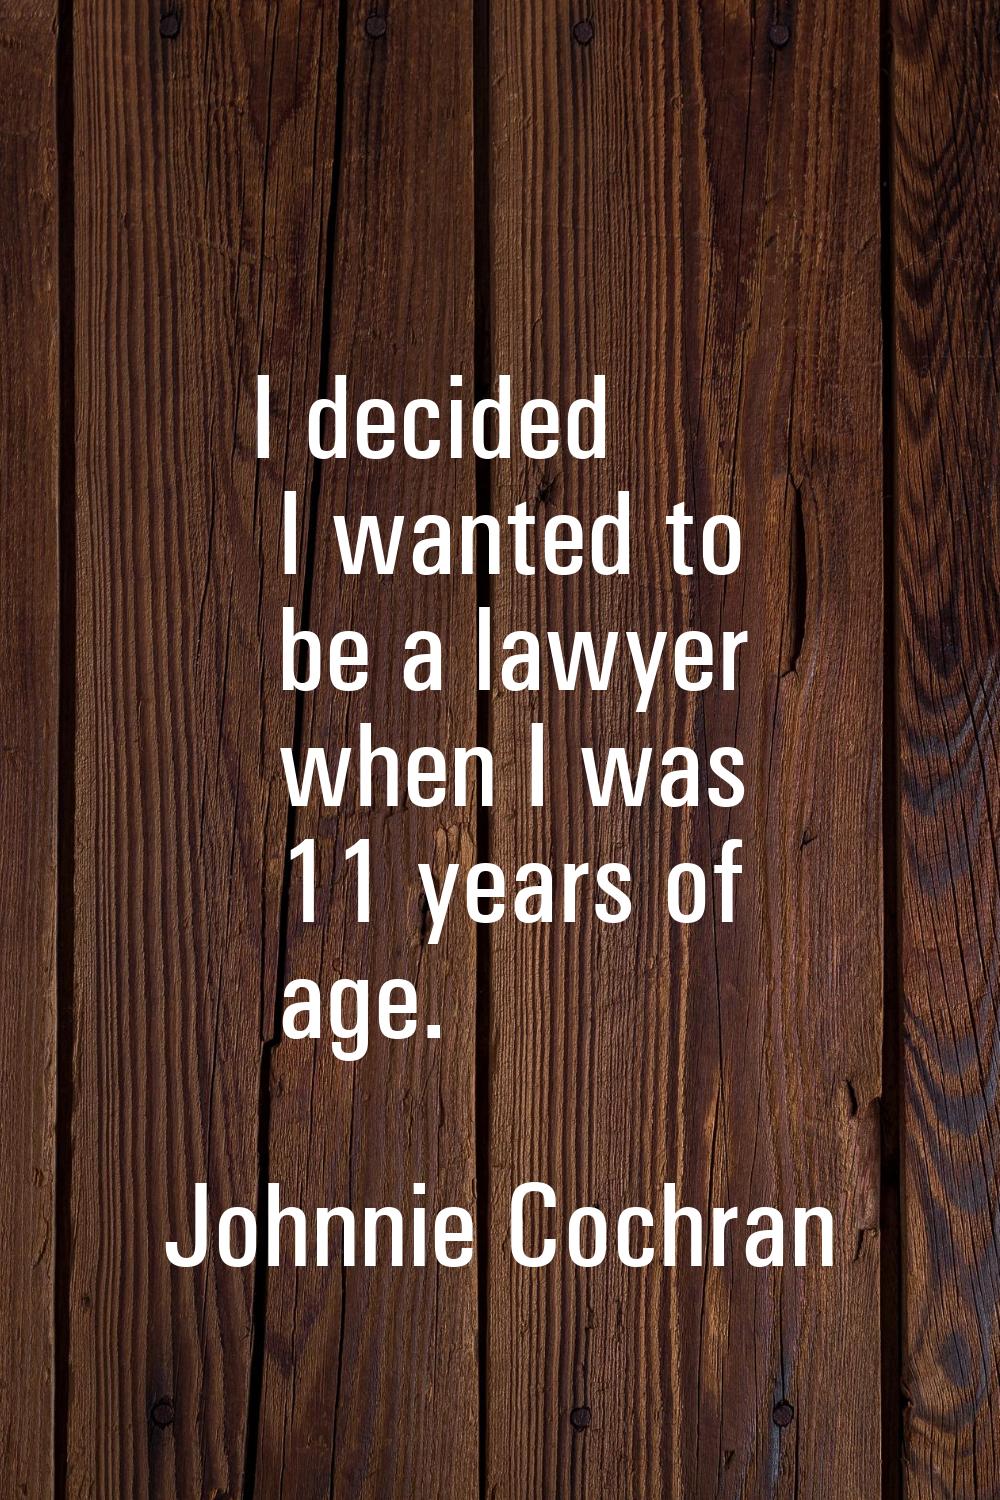 I decided I wanted to be a lawyer when I was 11 years of age.